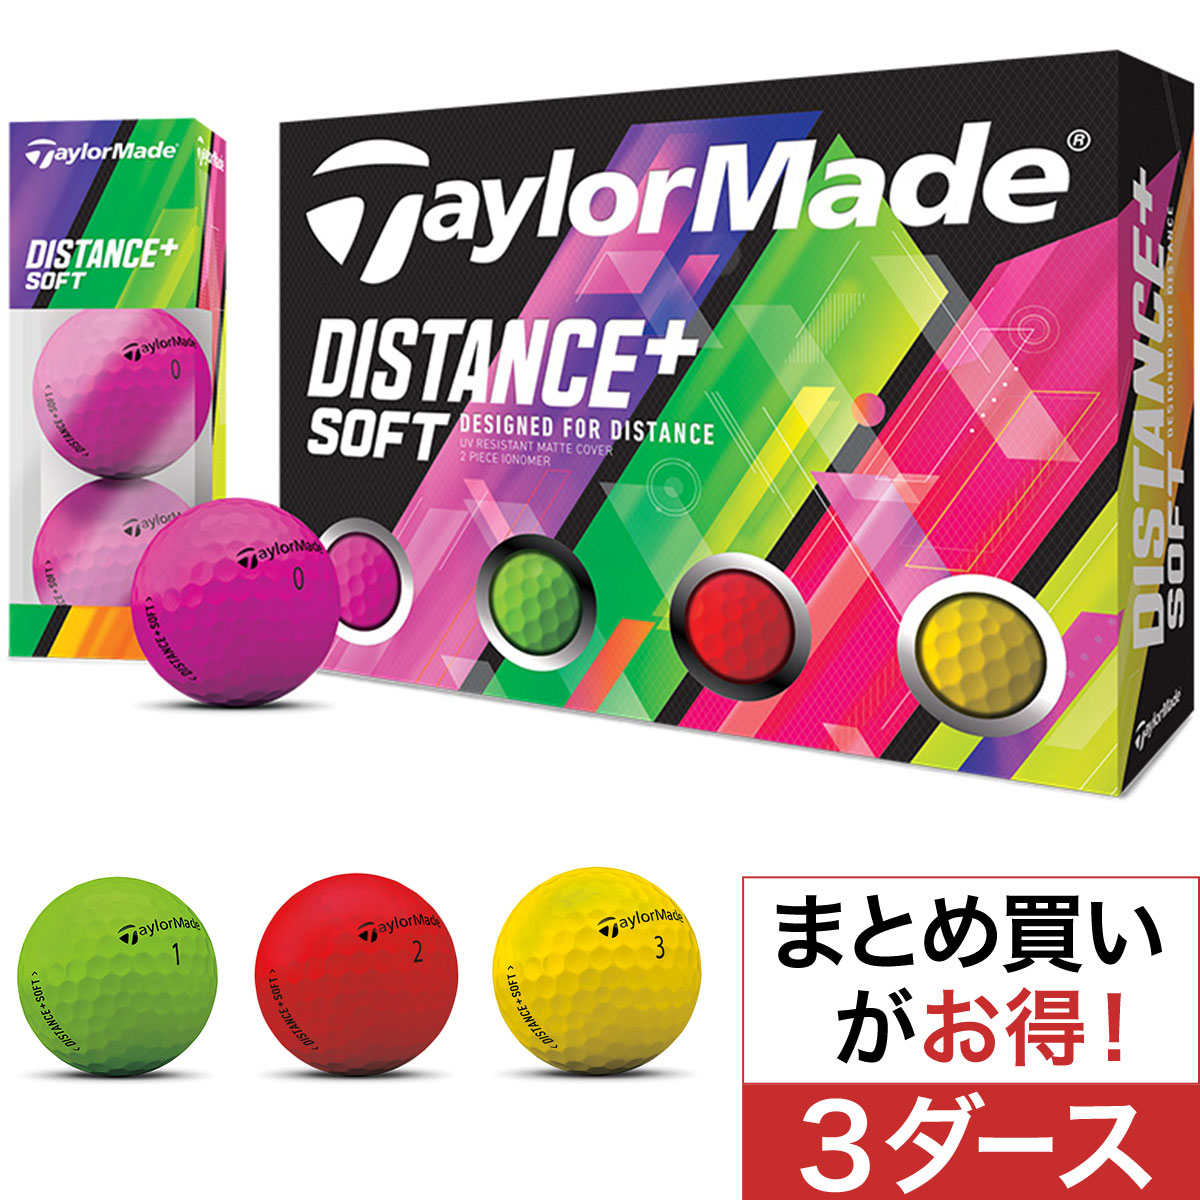  Distance+ ソフト マルチカラーボール 3ダースセット 